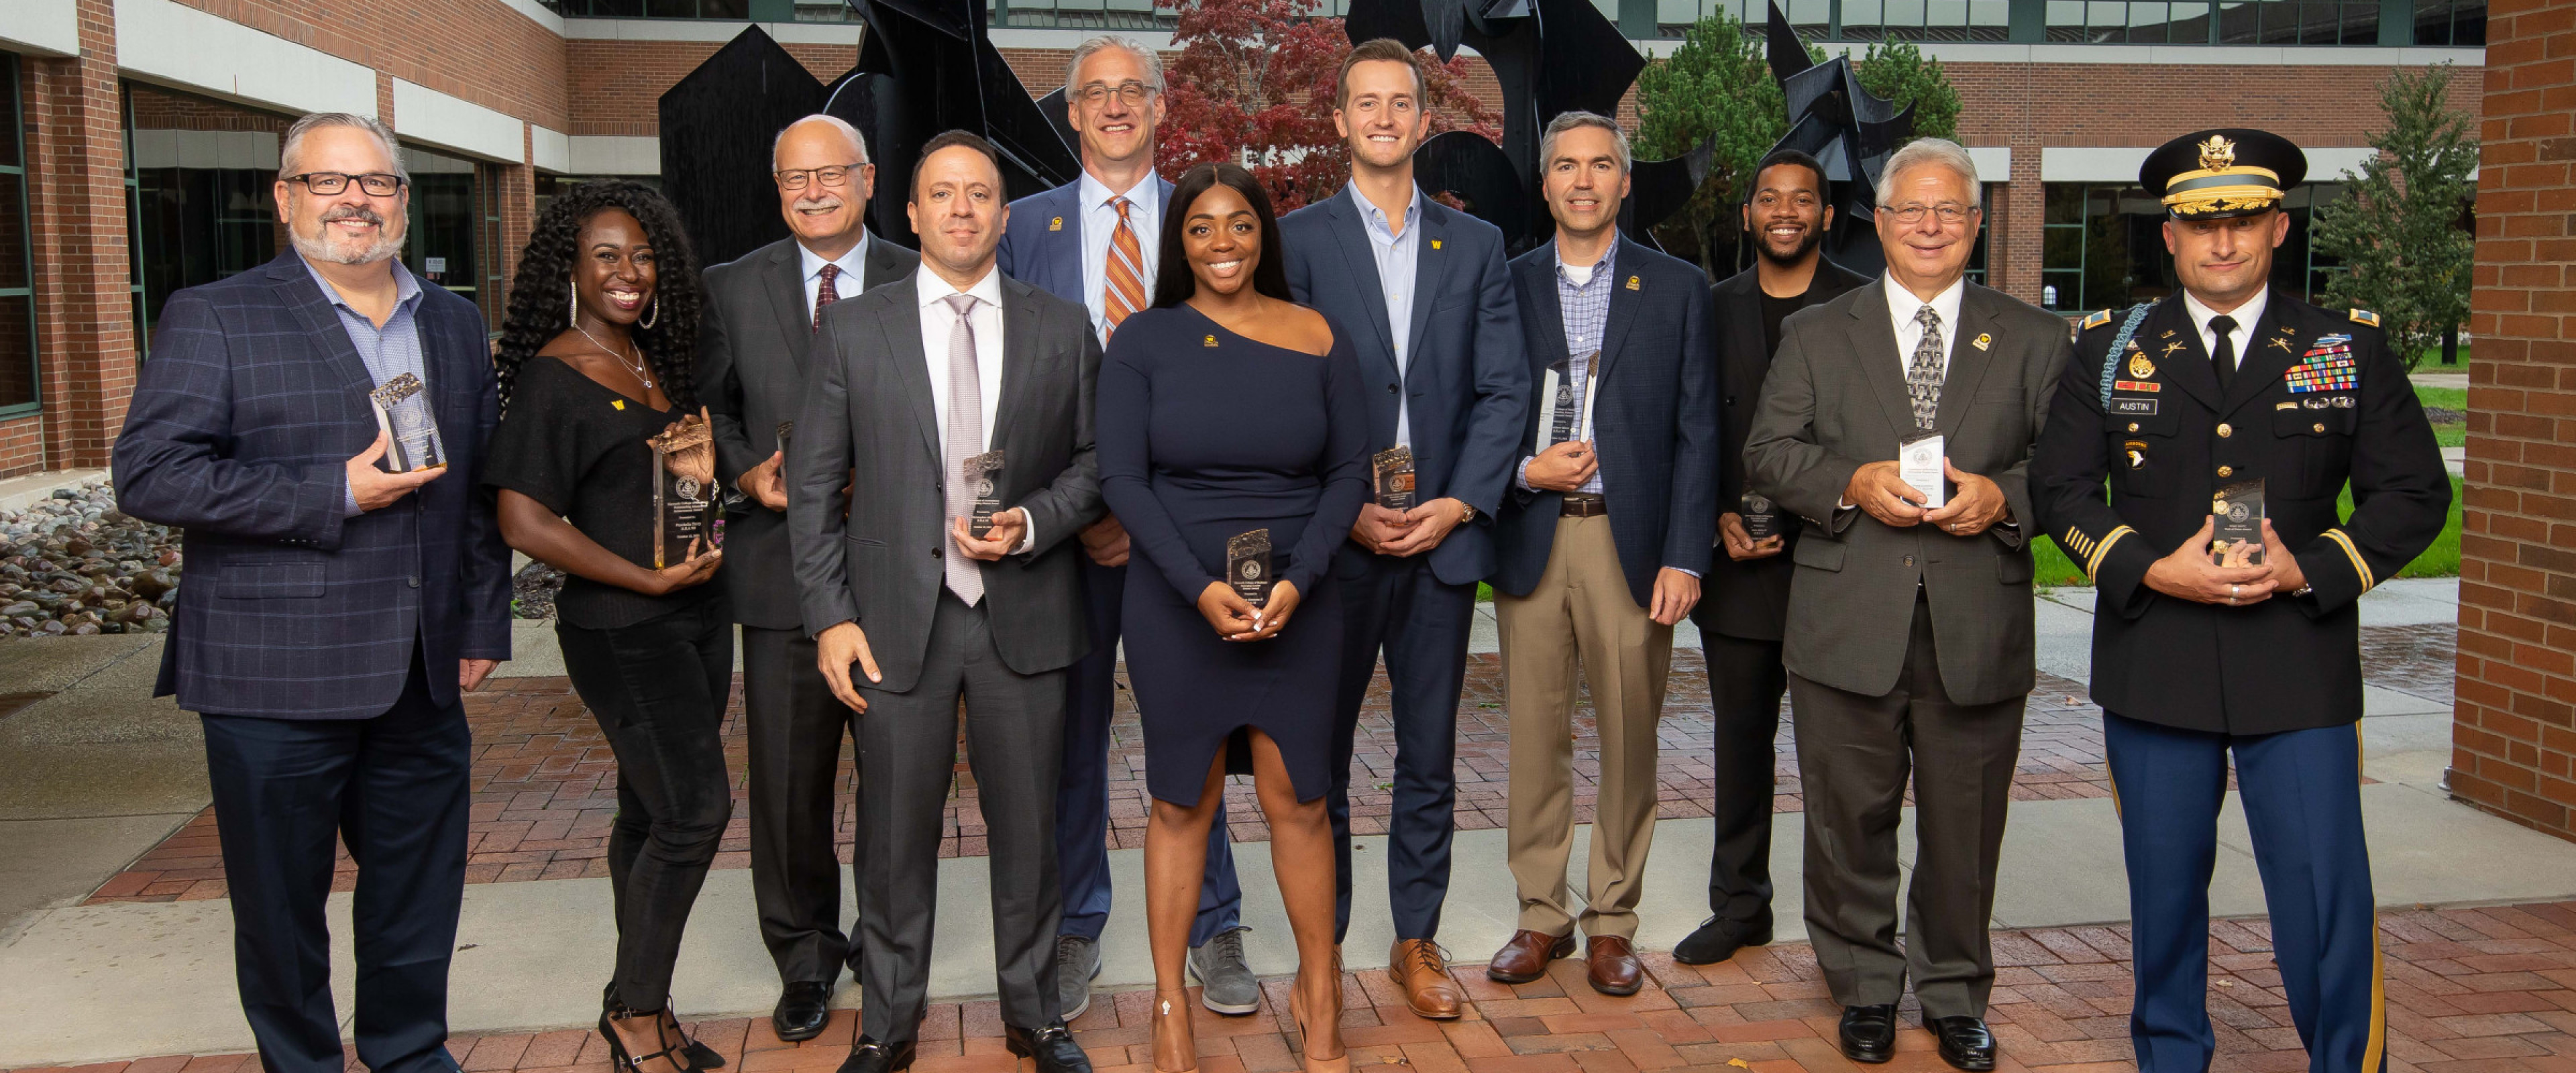 2021 award recipients stand outside the Haworth College of Business courtyard holding their awards.